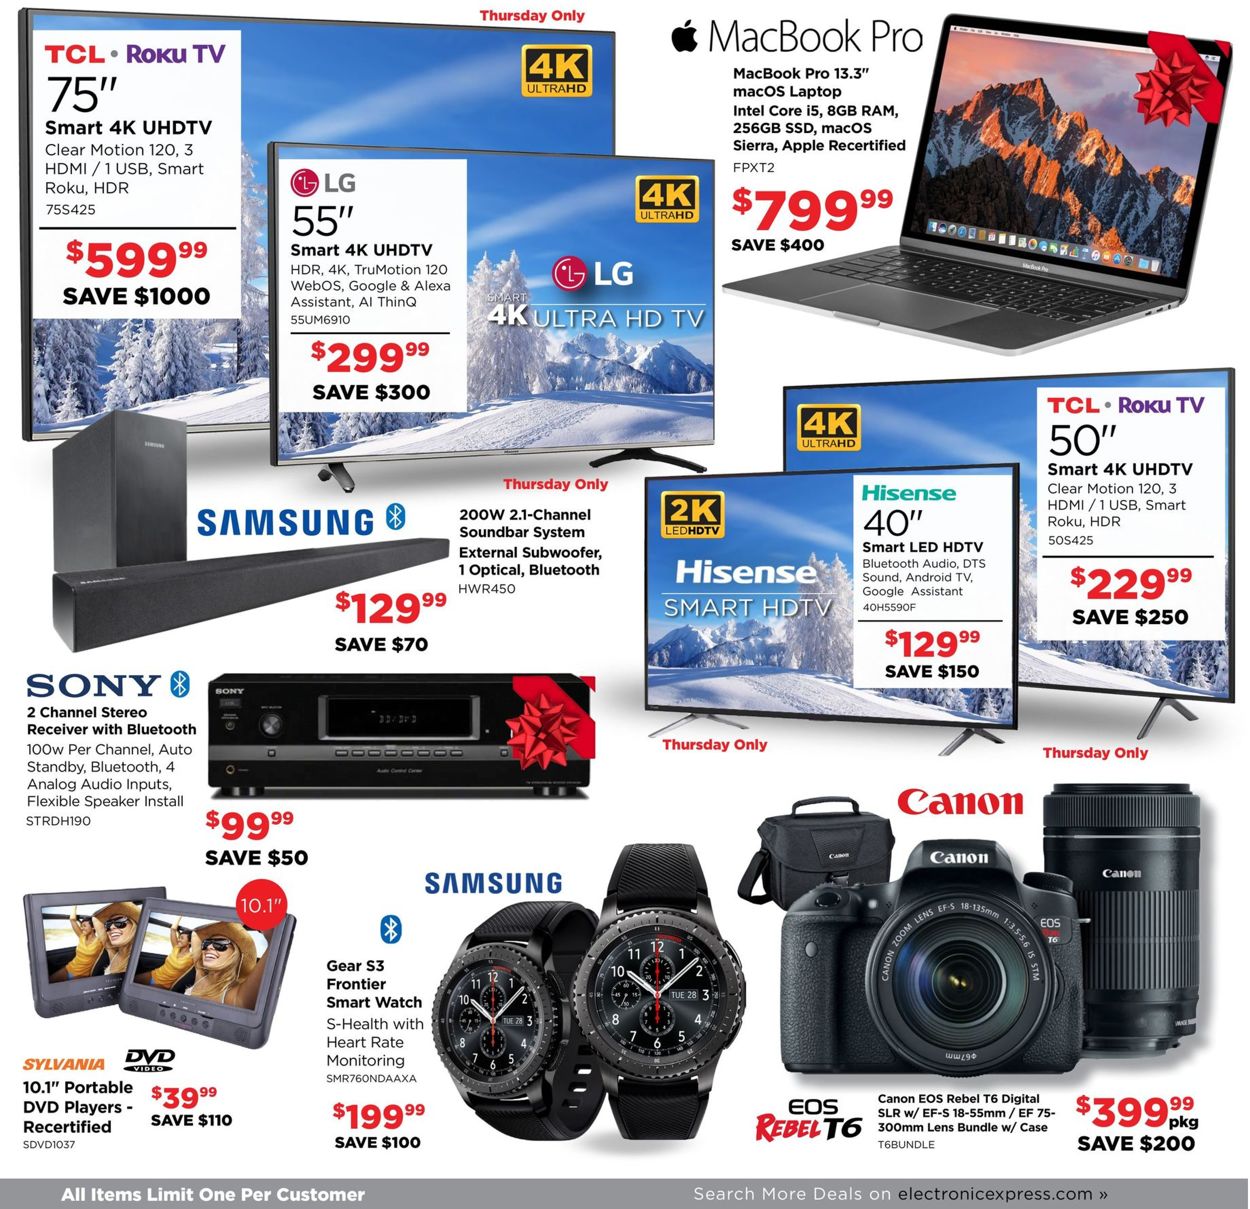 Electronic Express - Thanksgiving Ad 2019 Weekly Ad Circular - valid 11/28-11/30/2019 (Page 2)